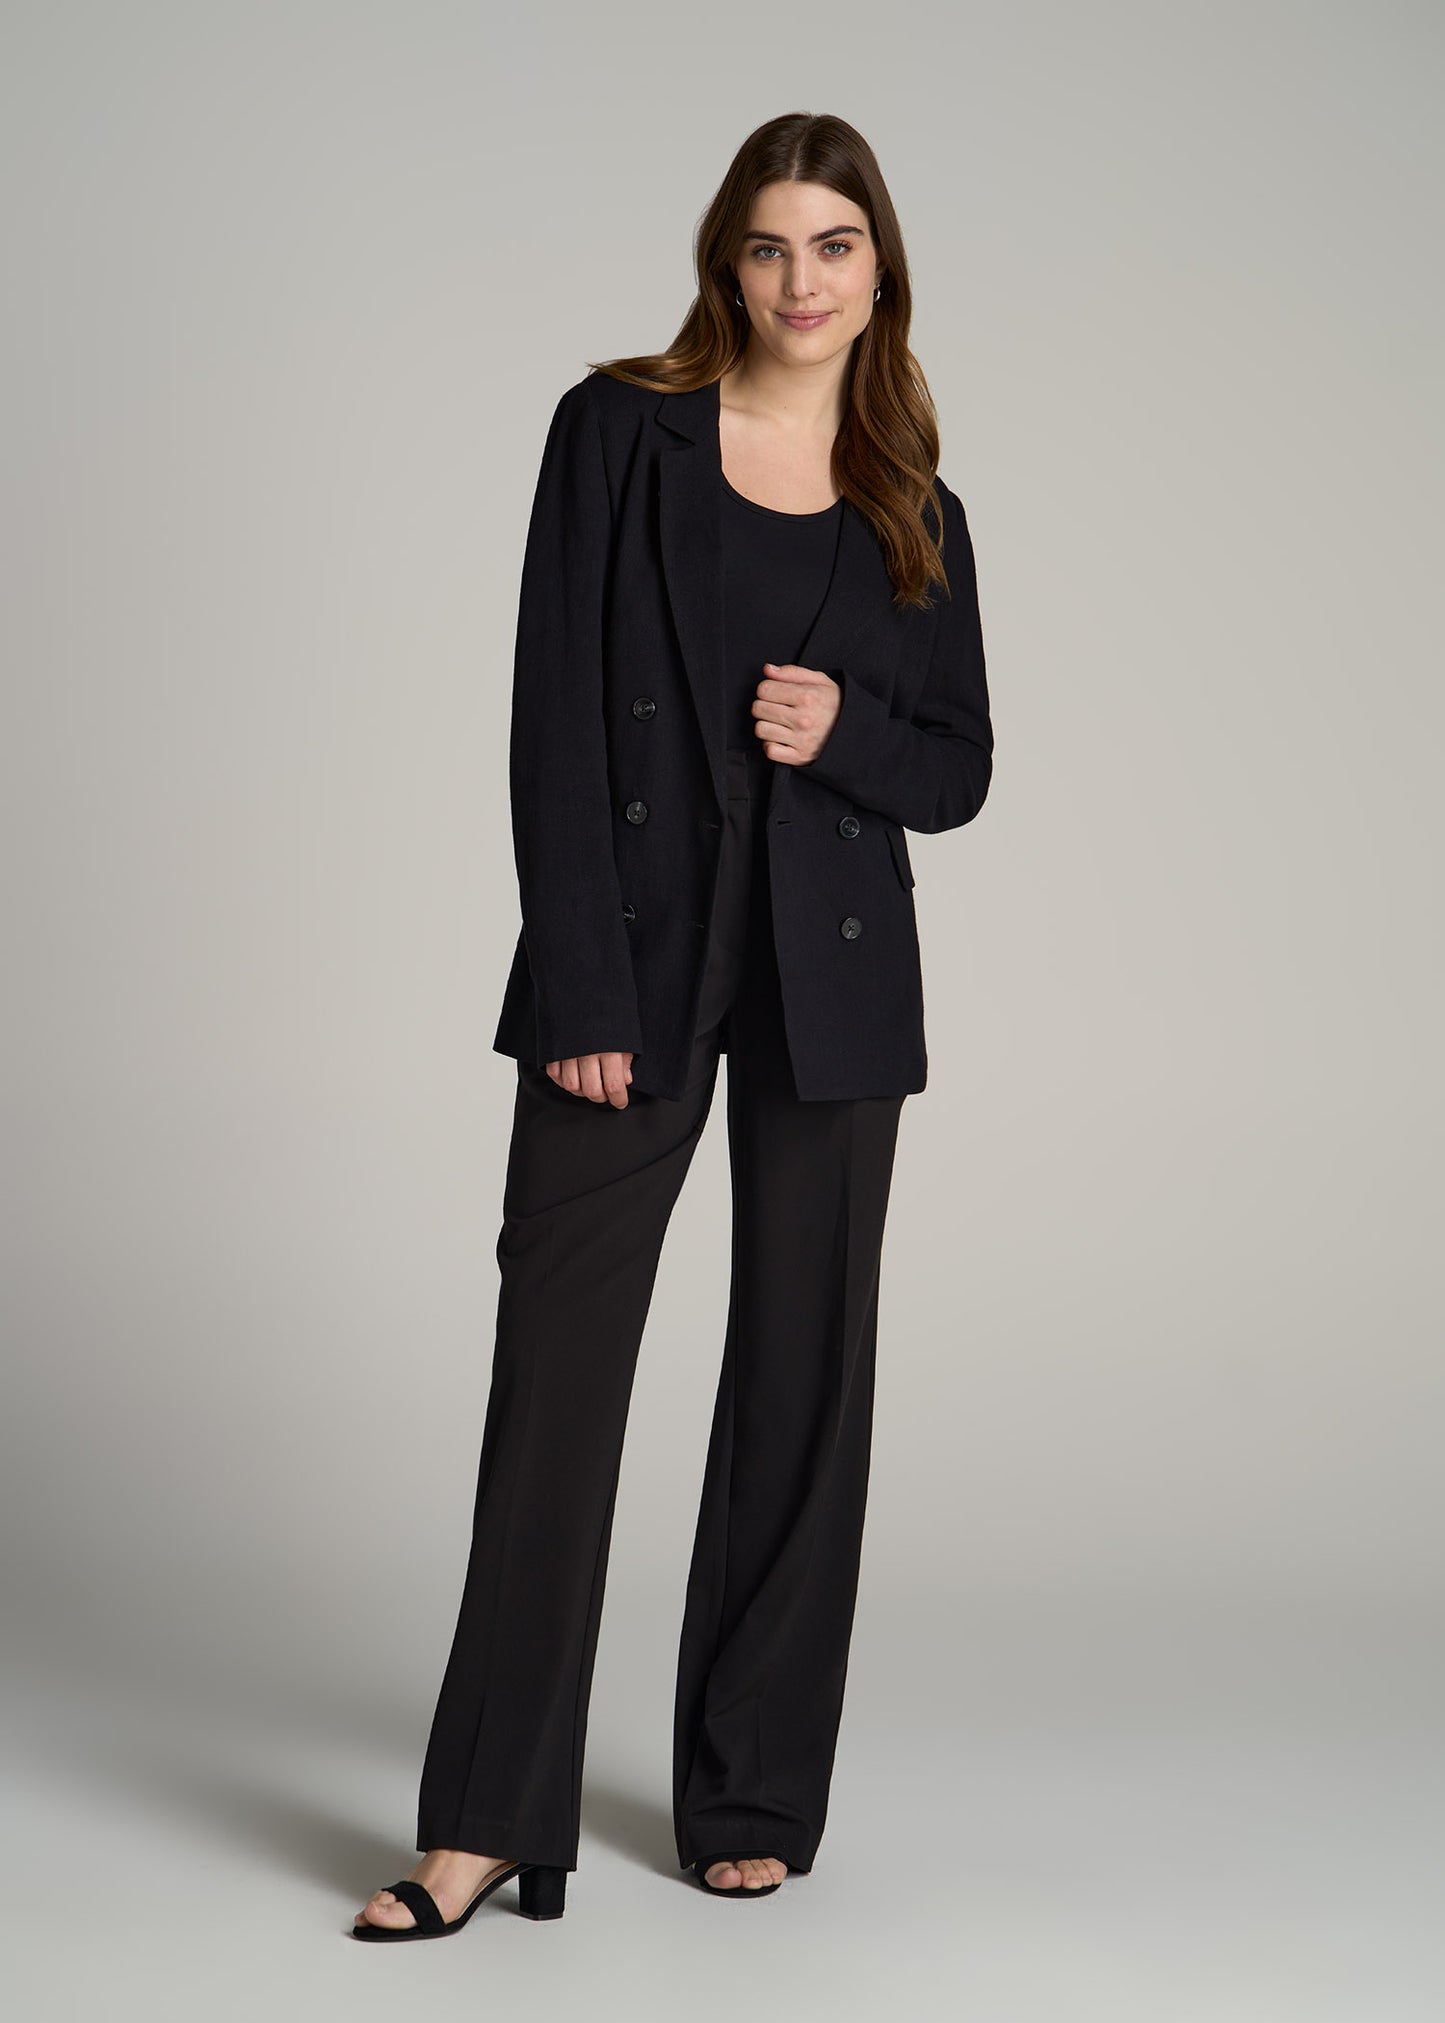 A tall woman wearing American Tall's Soft Shoulder Tie-Back Blazer in Black.